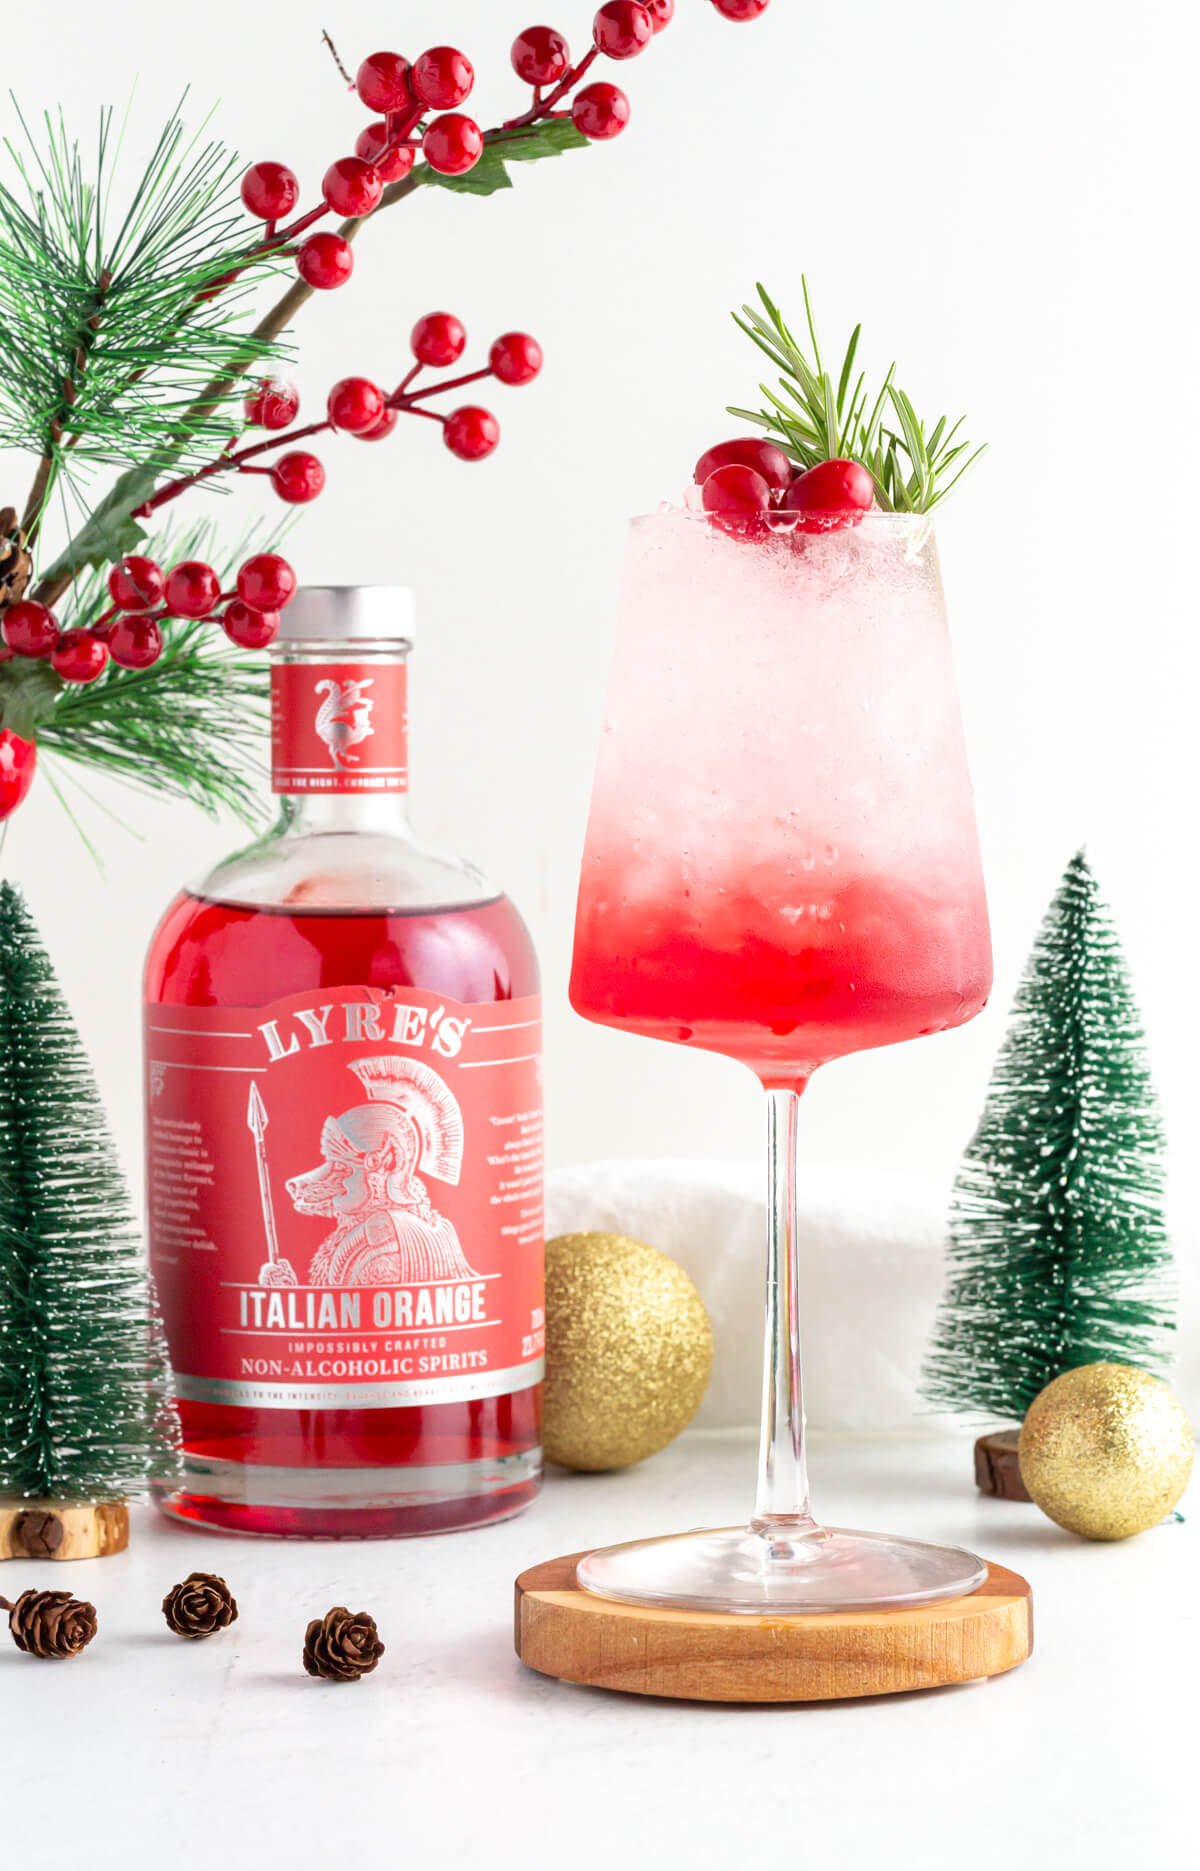 a layered mocktail in a wine glass with red at the bottom and white at the top garnished with rosemary and cranberries with Christmas ornaments scattered close by, as well as a bottle of Lyre's Italian Orange.